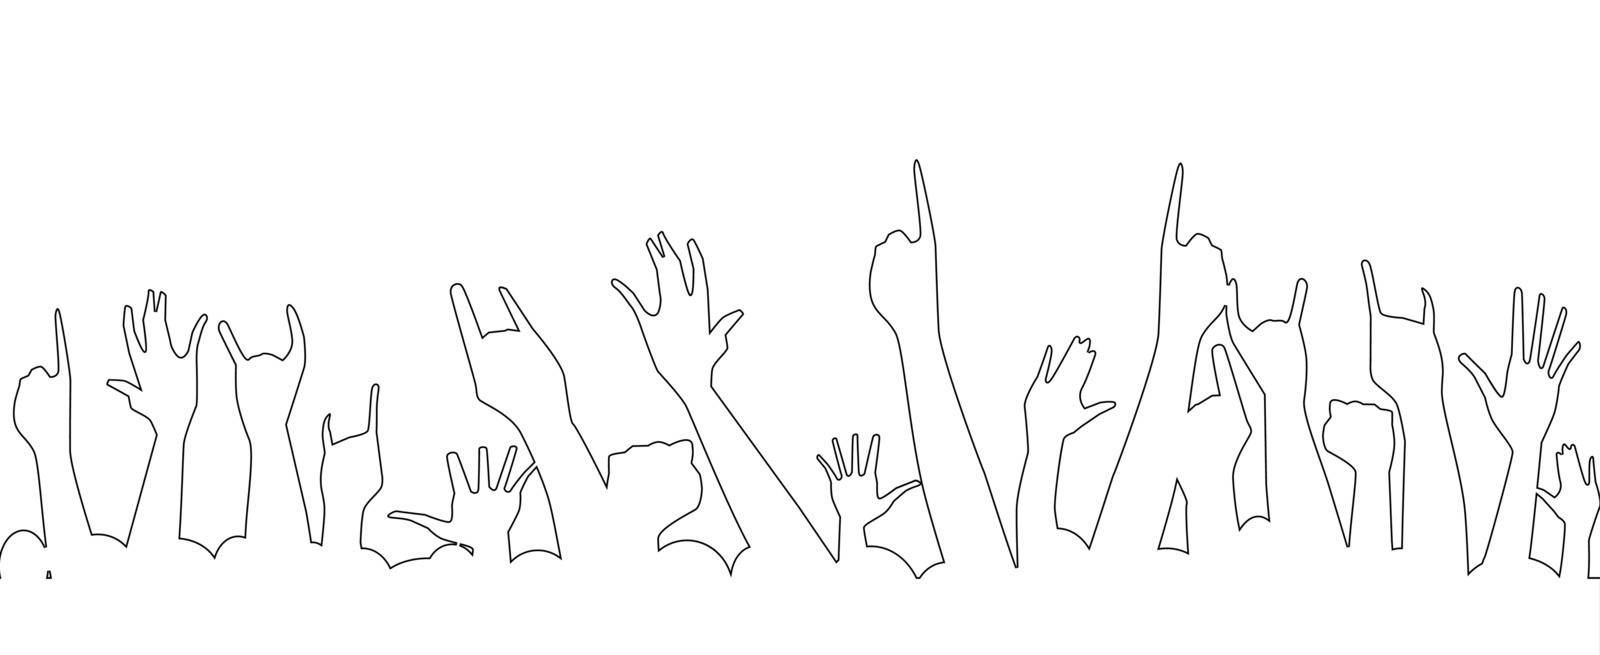 Hand outline raised in the air at a concert